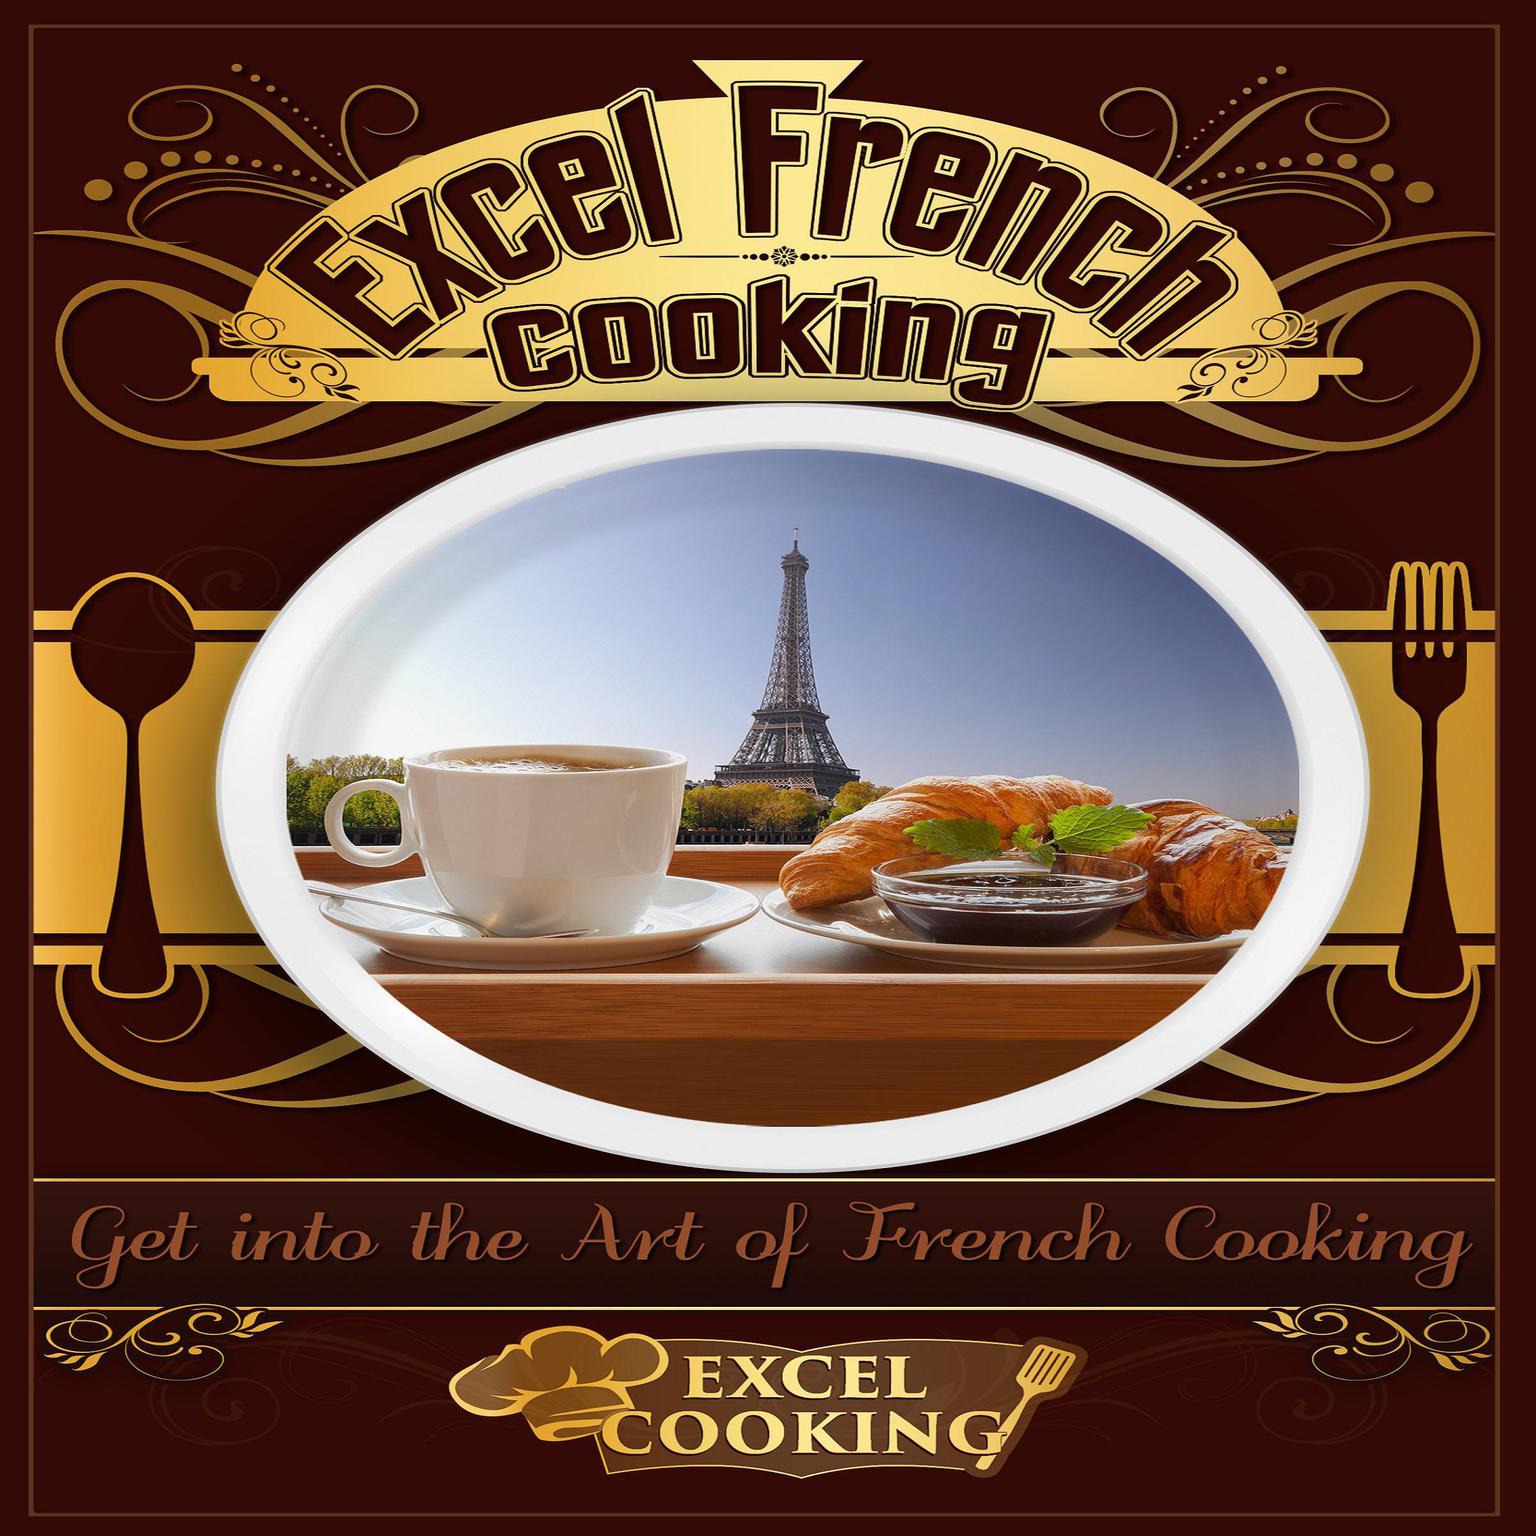 Excel French Cooking: Get into the Art of French Cooking Audiobook, by Excel Cooking